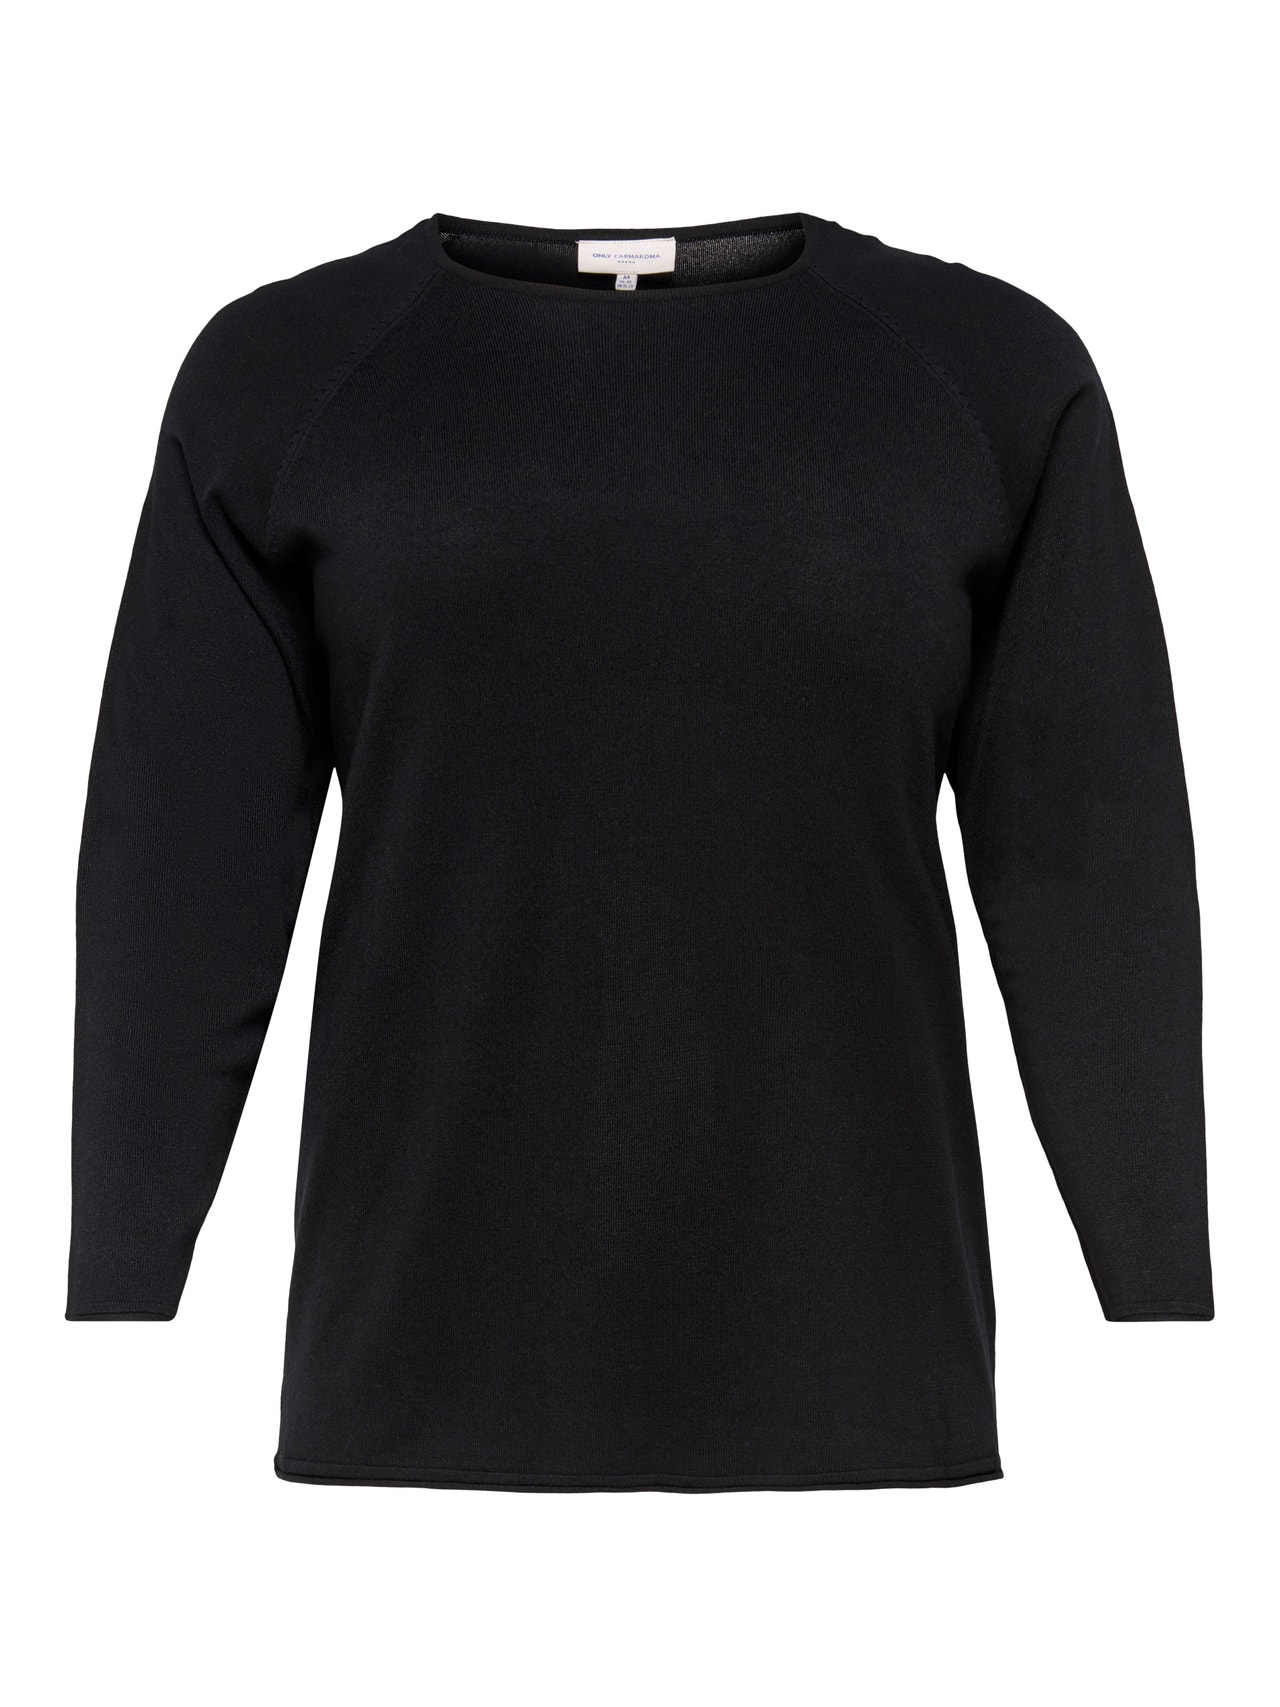 ONLY Round Neck Curve Rolled edge cuffs Dropped shoulders Pullover -Black - 15197209